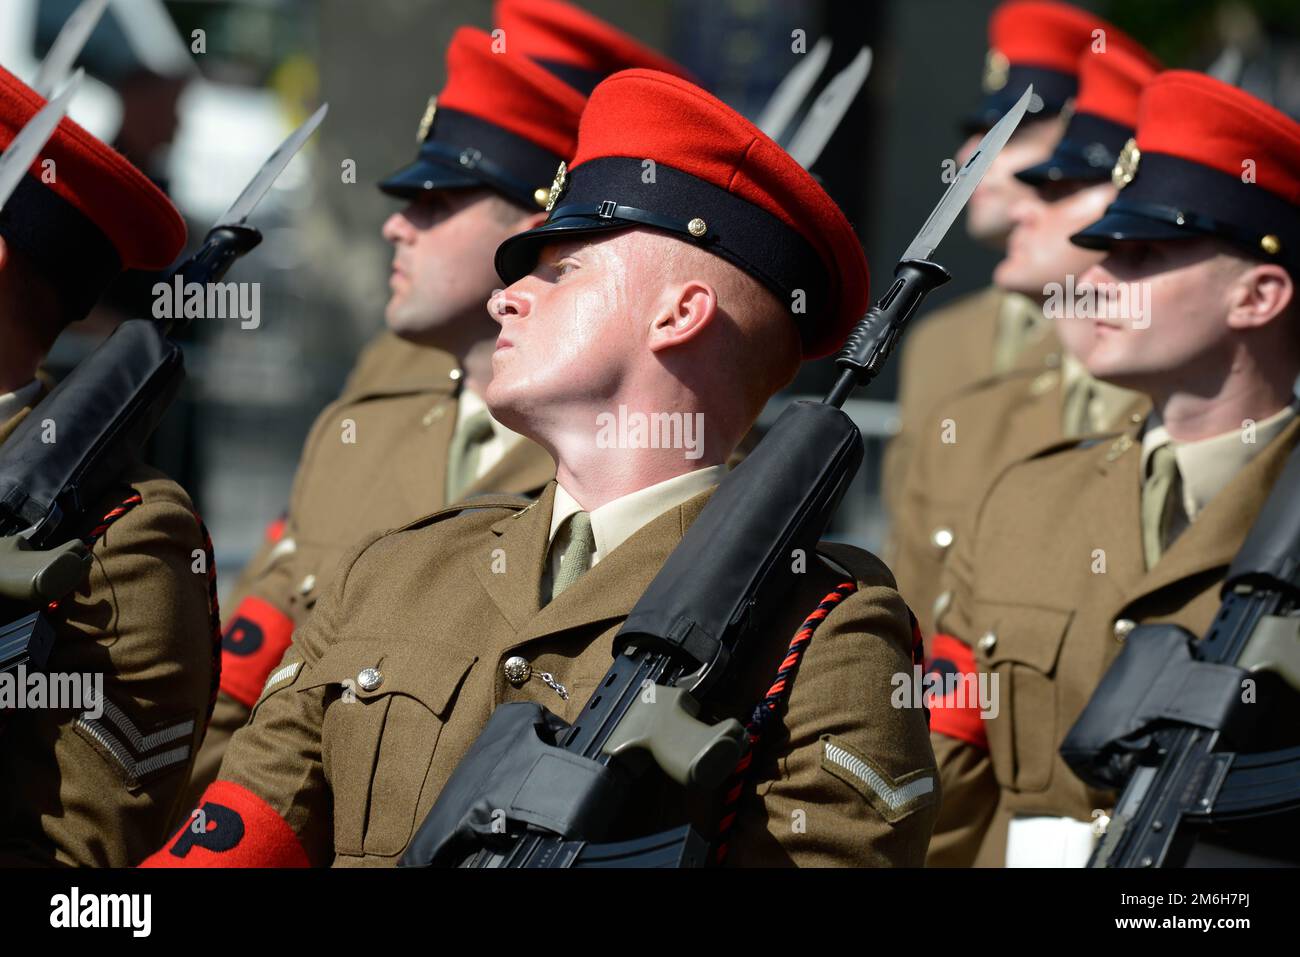 A British army soldier of the Royal Military Police; a Red Cap, marches on parade Stock Photo